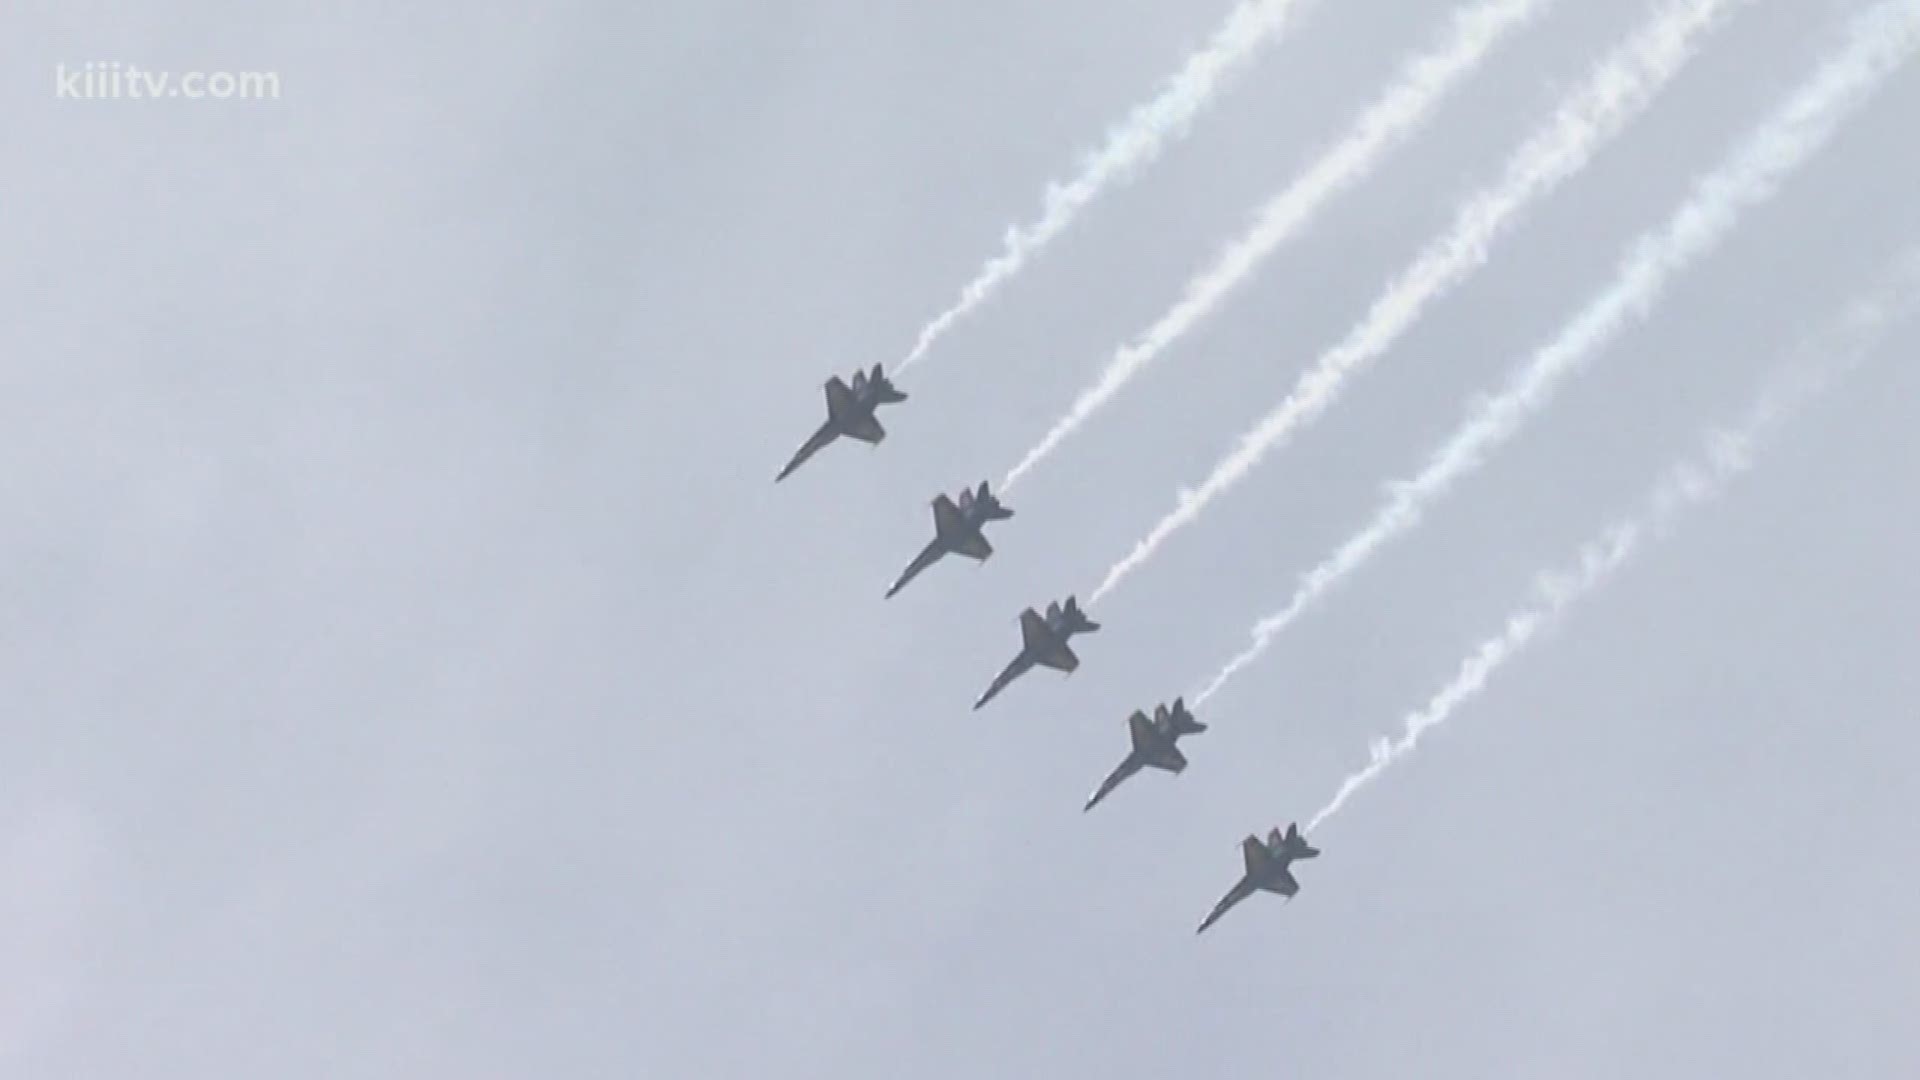 Upwards of 100,000 people are expected for this year's Wings Over South Texas Air Show at Naval Air Station-Corpus Christi.